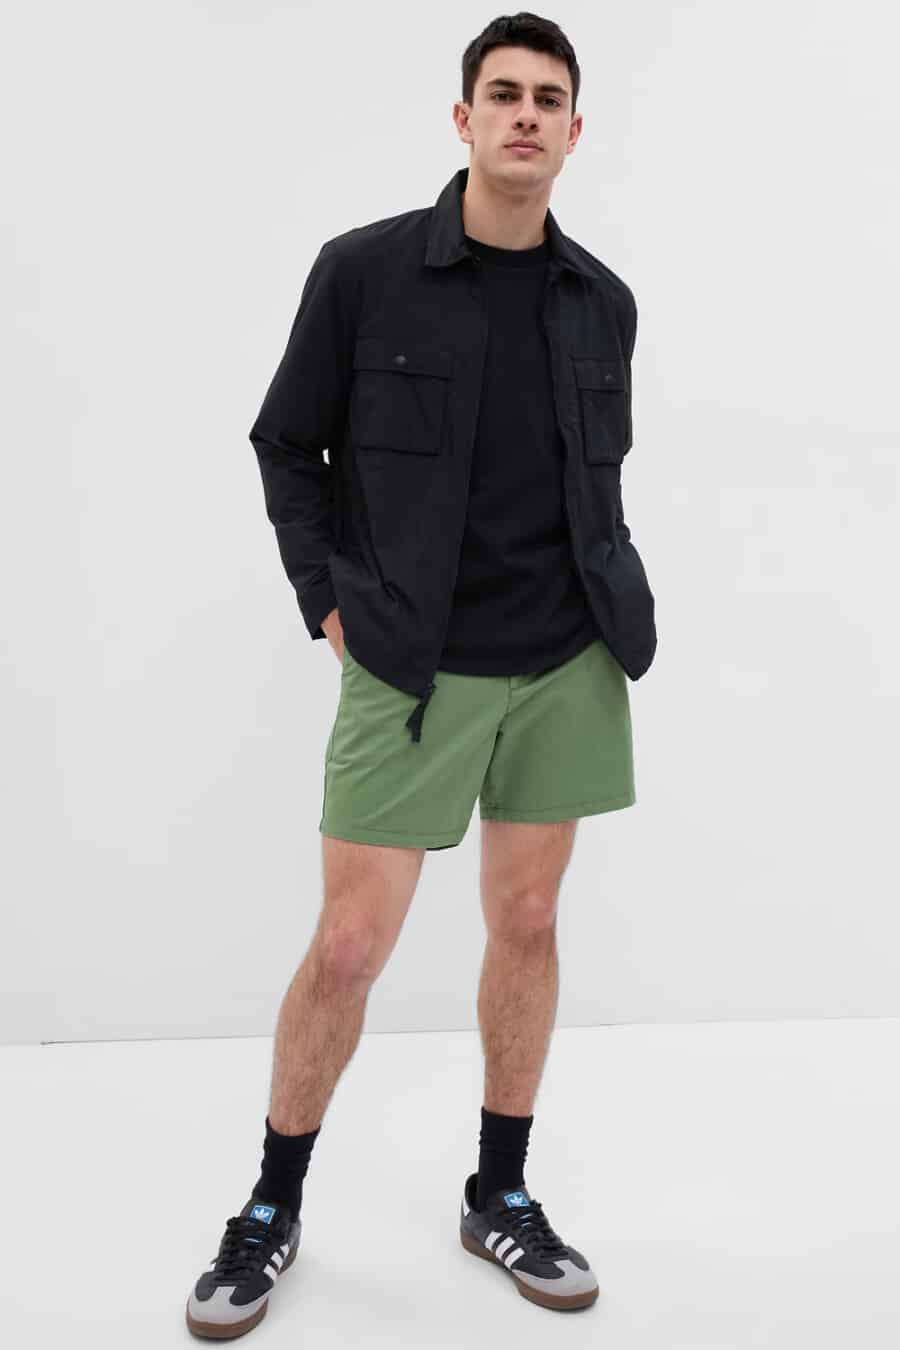 Men's light green athletic shorts, black T-shirt, black overshirt and black socks and sneakers outfit